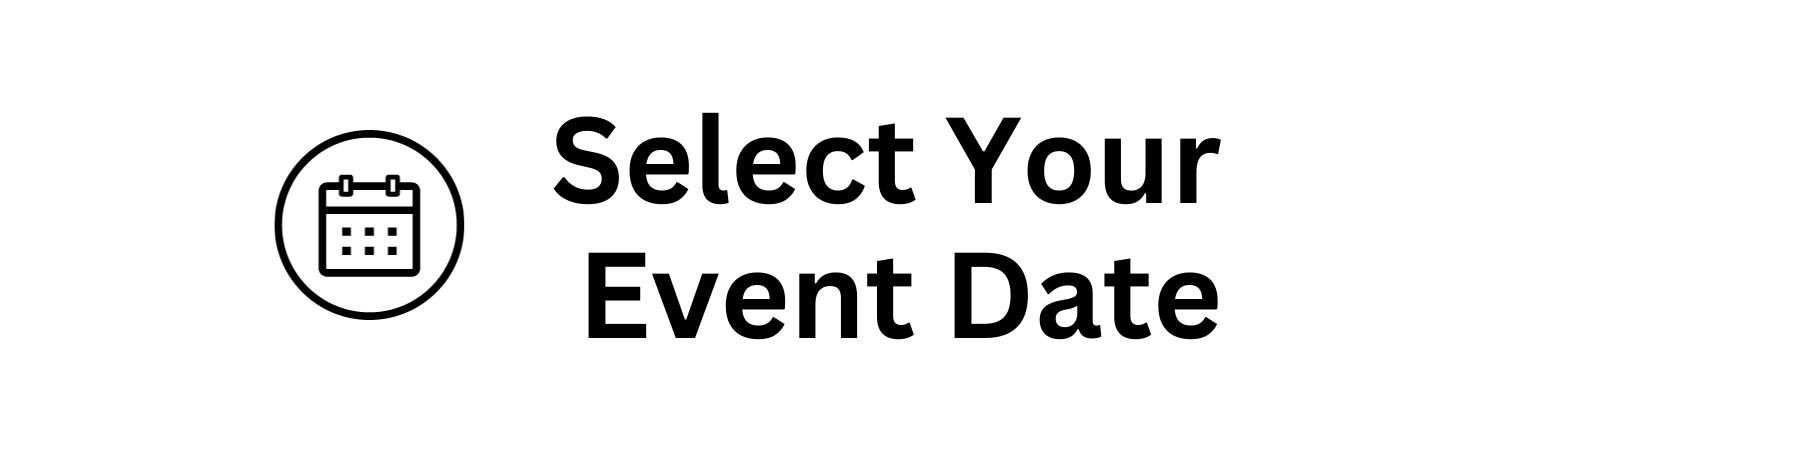 Select your event date